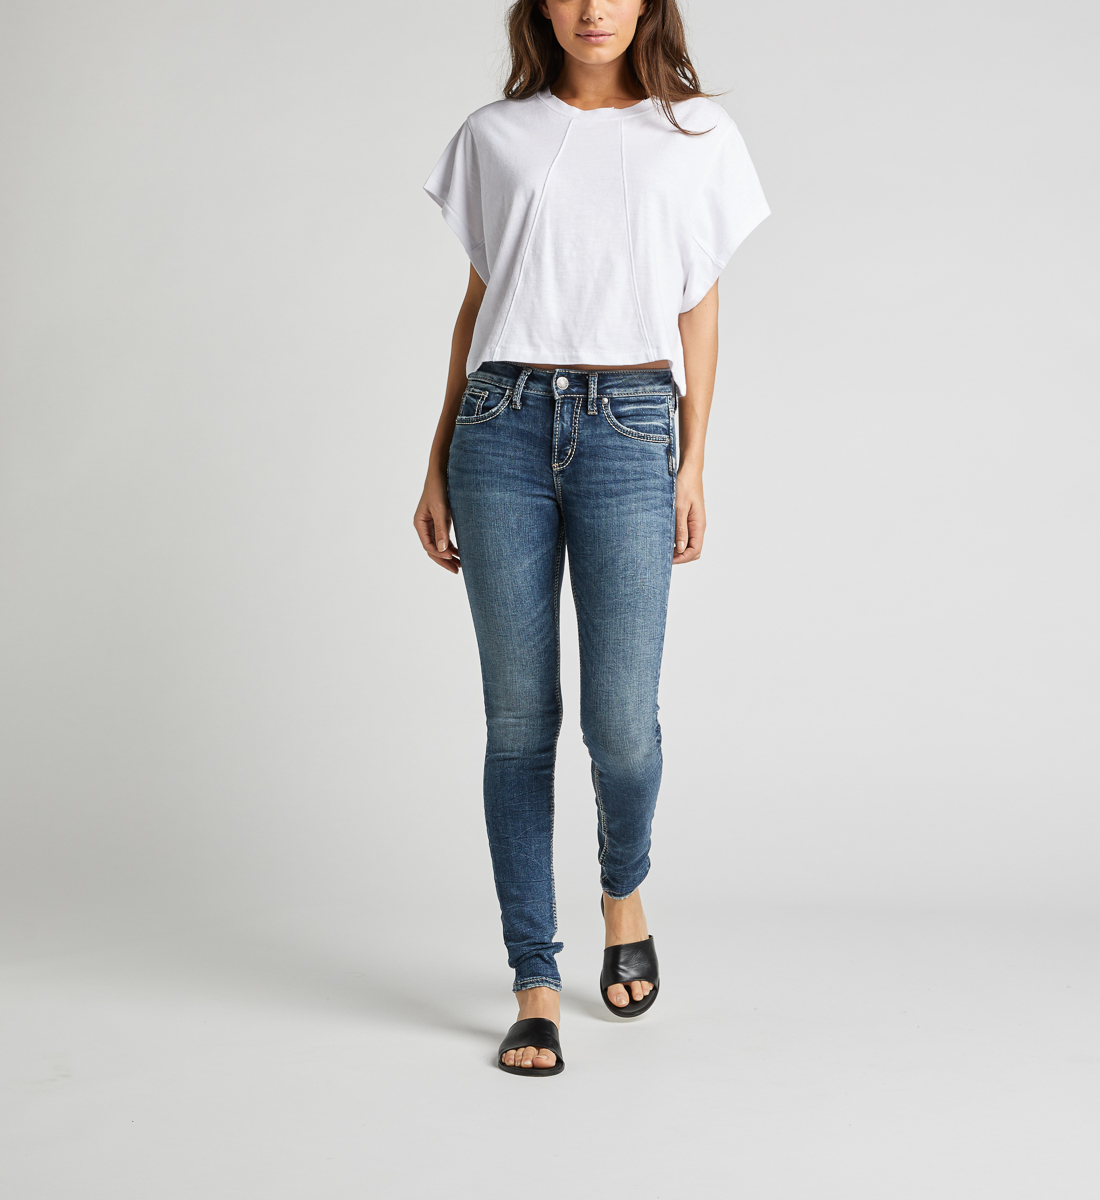 Avery High Rise Skinny Leg Jeans - Silver Jeans US